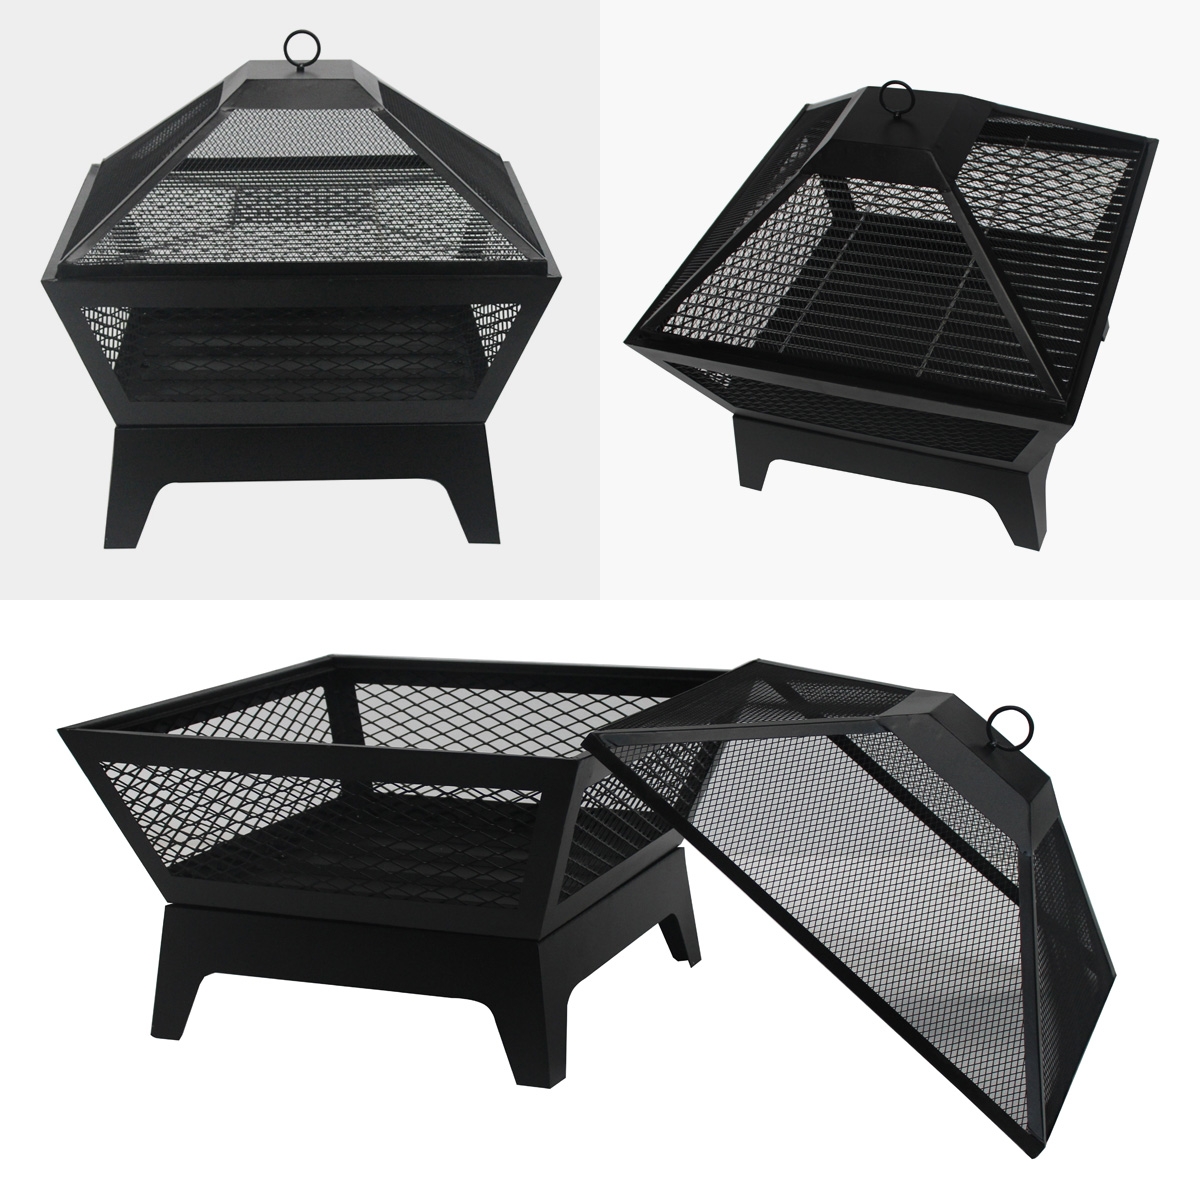 Windsor Steel Fire Pit And Bbq Grill, Windsor Fire Pit